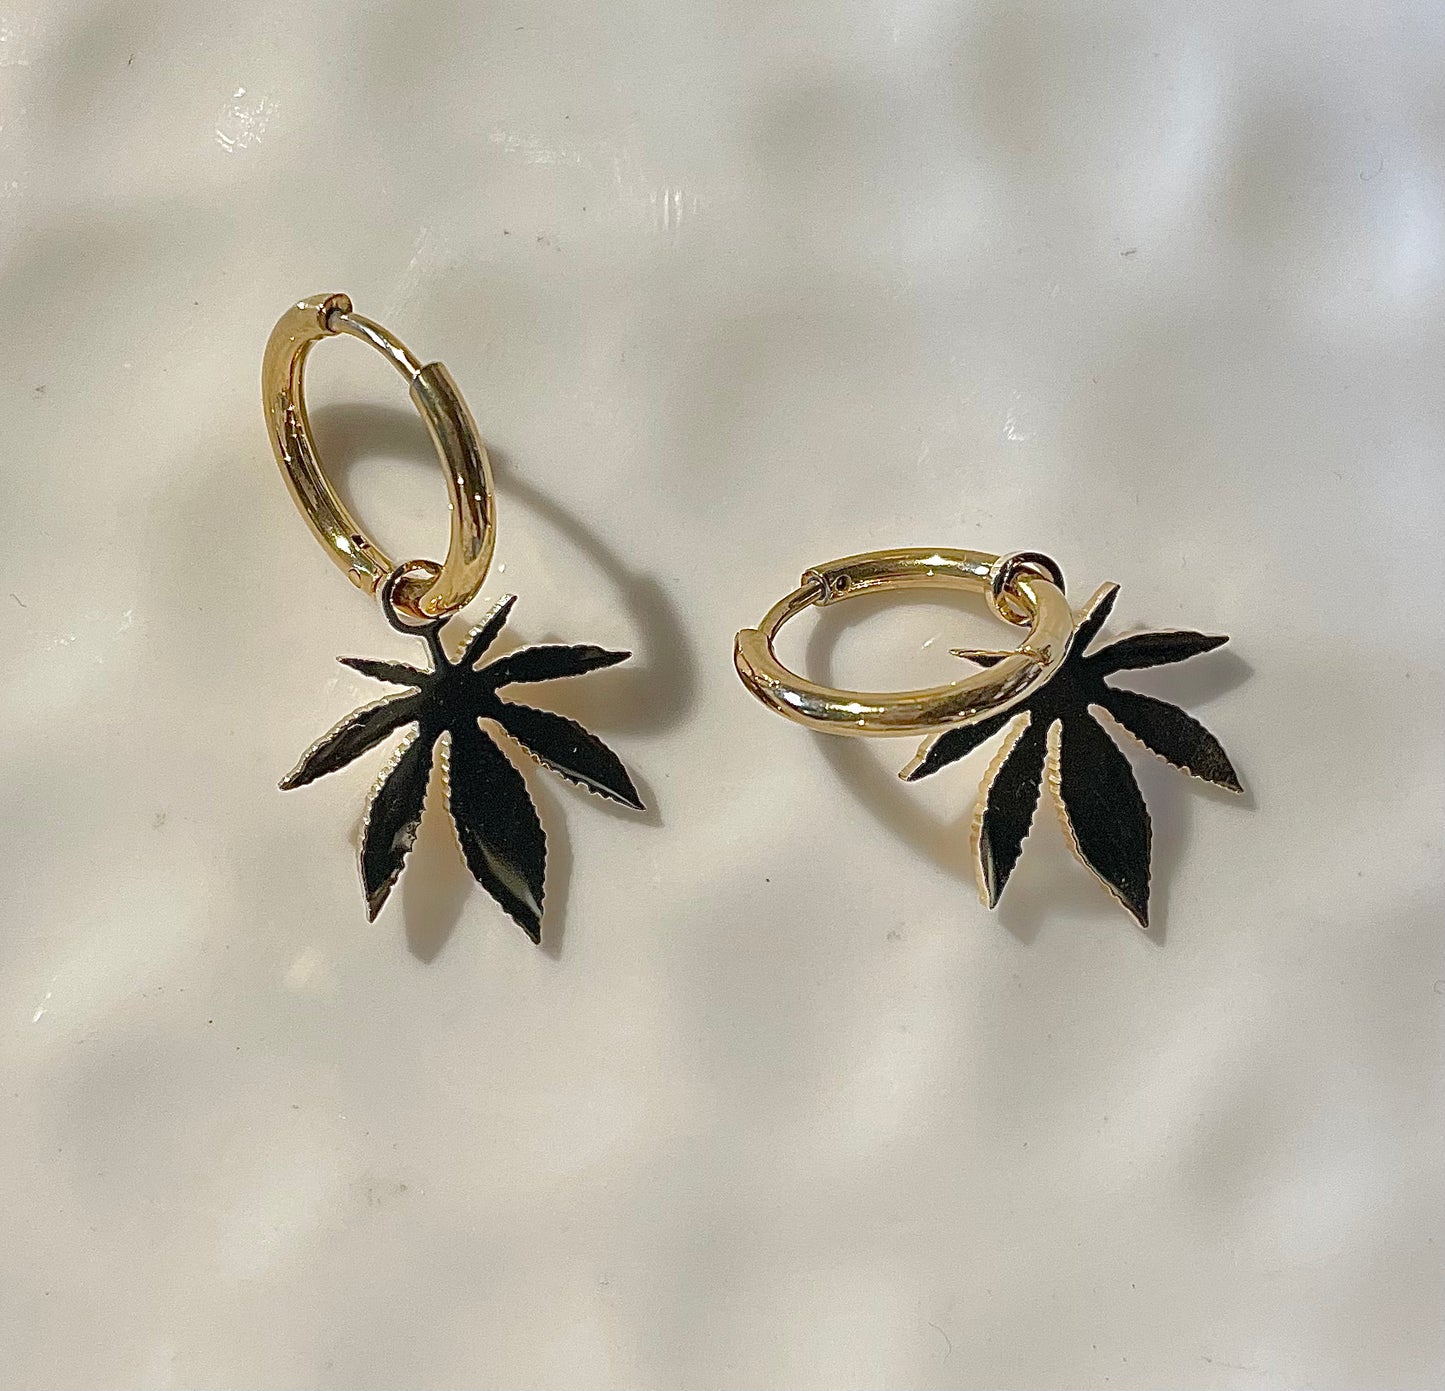 Small gold hoops with weed charm